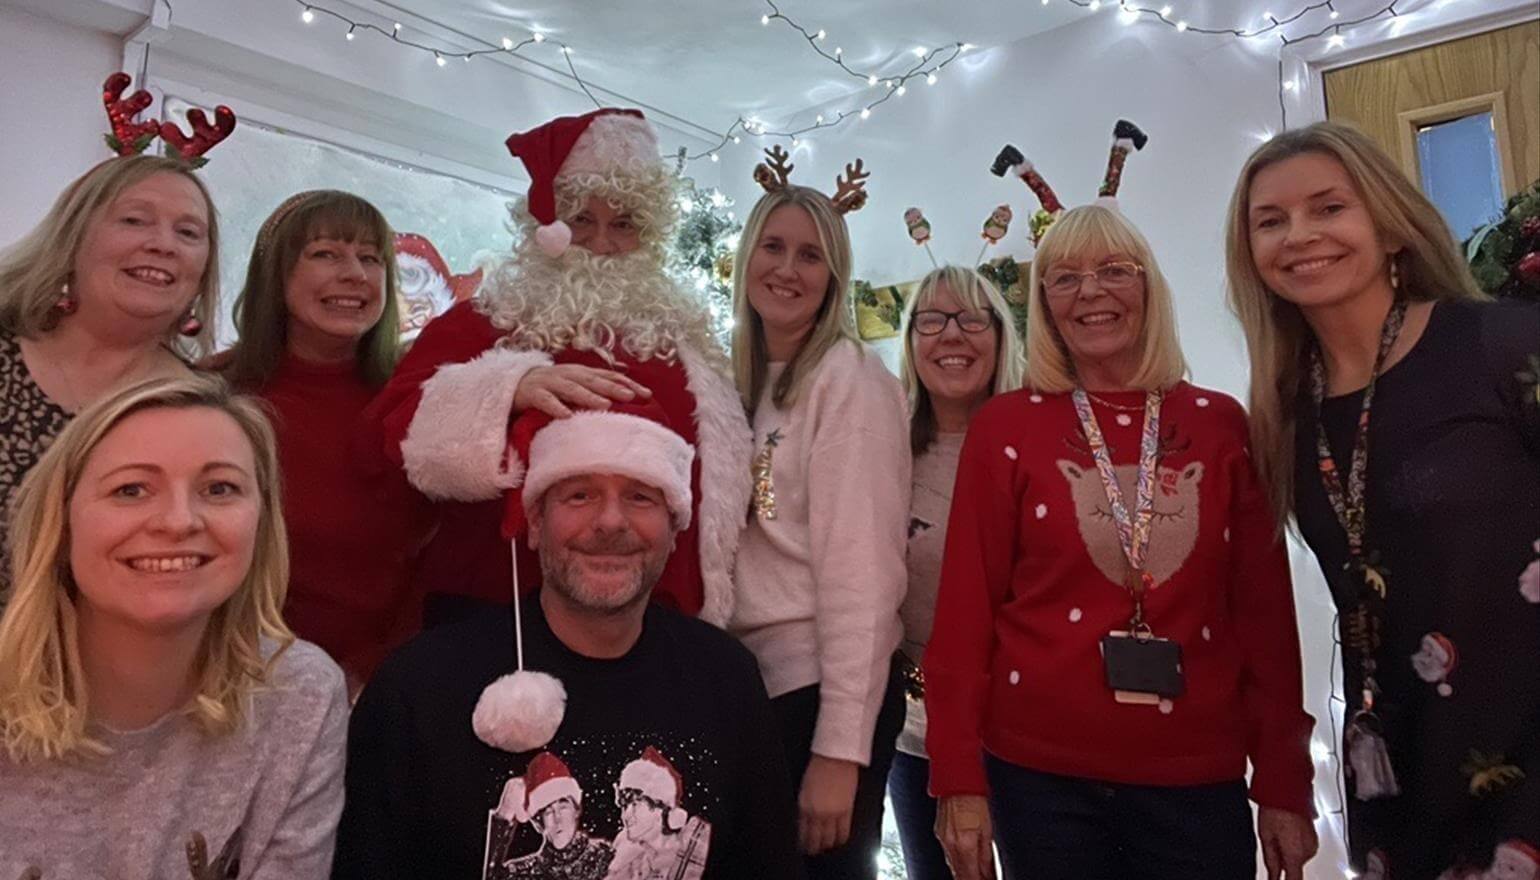 Staff create Christmas fun for children and families